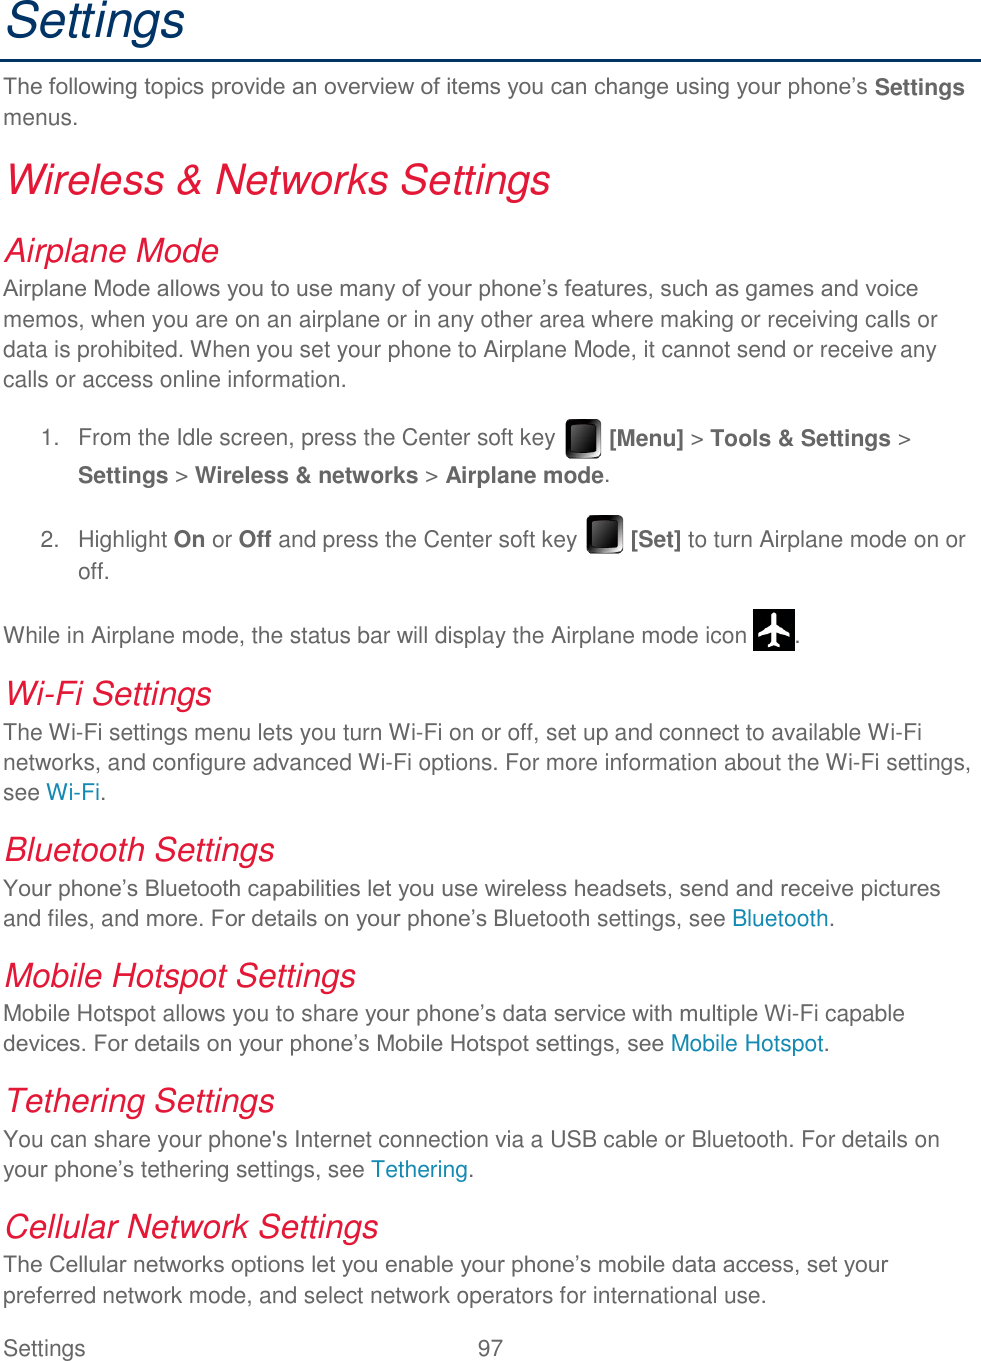 Settings  97   Settings The following topics provide an overview of items you can change using your phone’s Settings menus. Wireless &amp; Networks Settings Airplane Mode Airplane Mode allows you to use many of your phone’s features, such as games and voice memos, when you are on an airplane or in any other area where making or receiving calls or data is prohibited. When you set your phone to Airplane Mode, it cannot send or receive any calls or access online information.   From the Idle screen, press the Center soft key   [Menu] &gt; Tools &amp; Settings &gt; 1.Settings &gt; Wireless &amp; networks &gt; Airplane mode.   Highlight On or Off and press the Center soft key   [Set] to turn Airplane mode on or 2.off. While in Airplane mode, the status bar will display the Airplane mode icon  . Wi-Fi Settings The Wi-Fi settings menu lets you turn Wi-Fi on or off, set up and connect to available Wi-Fi networks, and configure advanced Wi-Fi options. For more information about the Wi-Fi settings, see Wi-Fi. Bluetooth Settings Your phone’s Bluetooth capabilities let you use wireless headsets, send and receive pictures and files, and more. For details on your phone’s Bluetooth settings, see Bluetooth. Mobile Hotspot Settings Mobile Hotspot allows you to share your phone’s data service with multiple Wi-Fi capable devices. For details on your phone’s Mobile Hotspot settings, see Mobile Hotspot. Tethering Settings You can share your phone&apos;s Internet connection via a USB cable or Bluetooth. For details on your phone’s tethering settings, see Tethering. Cellular Network Settings The Cellular networks options let you enable your phone’s mobile data access, set your preferred network mode, and select network operators for international use. 